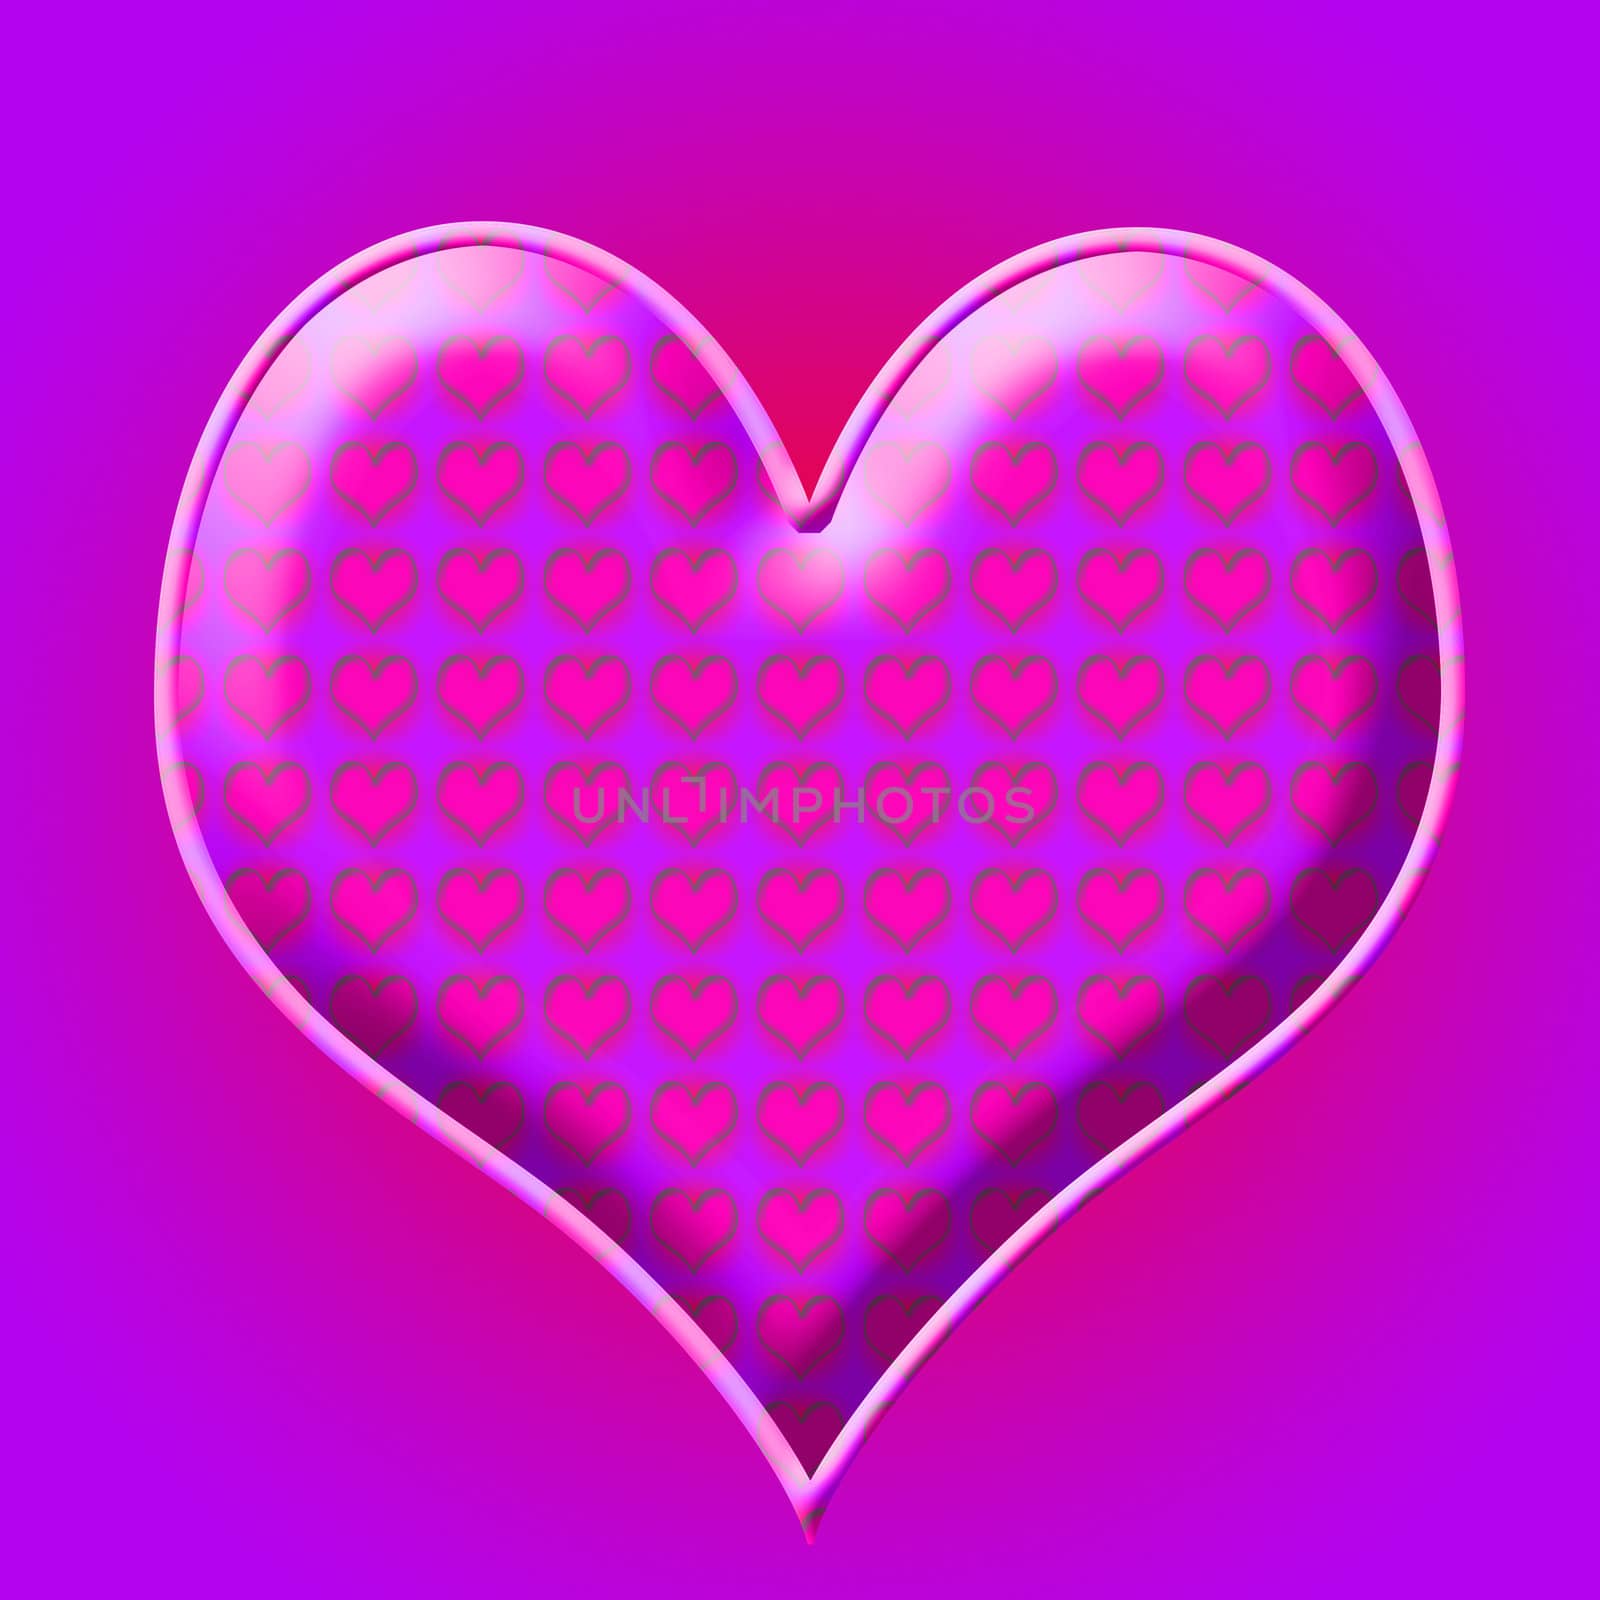 purple and pink heart with abstract hearts in the center of the middle heart